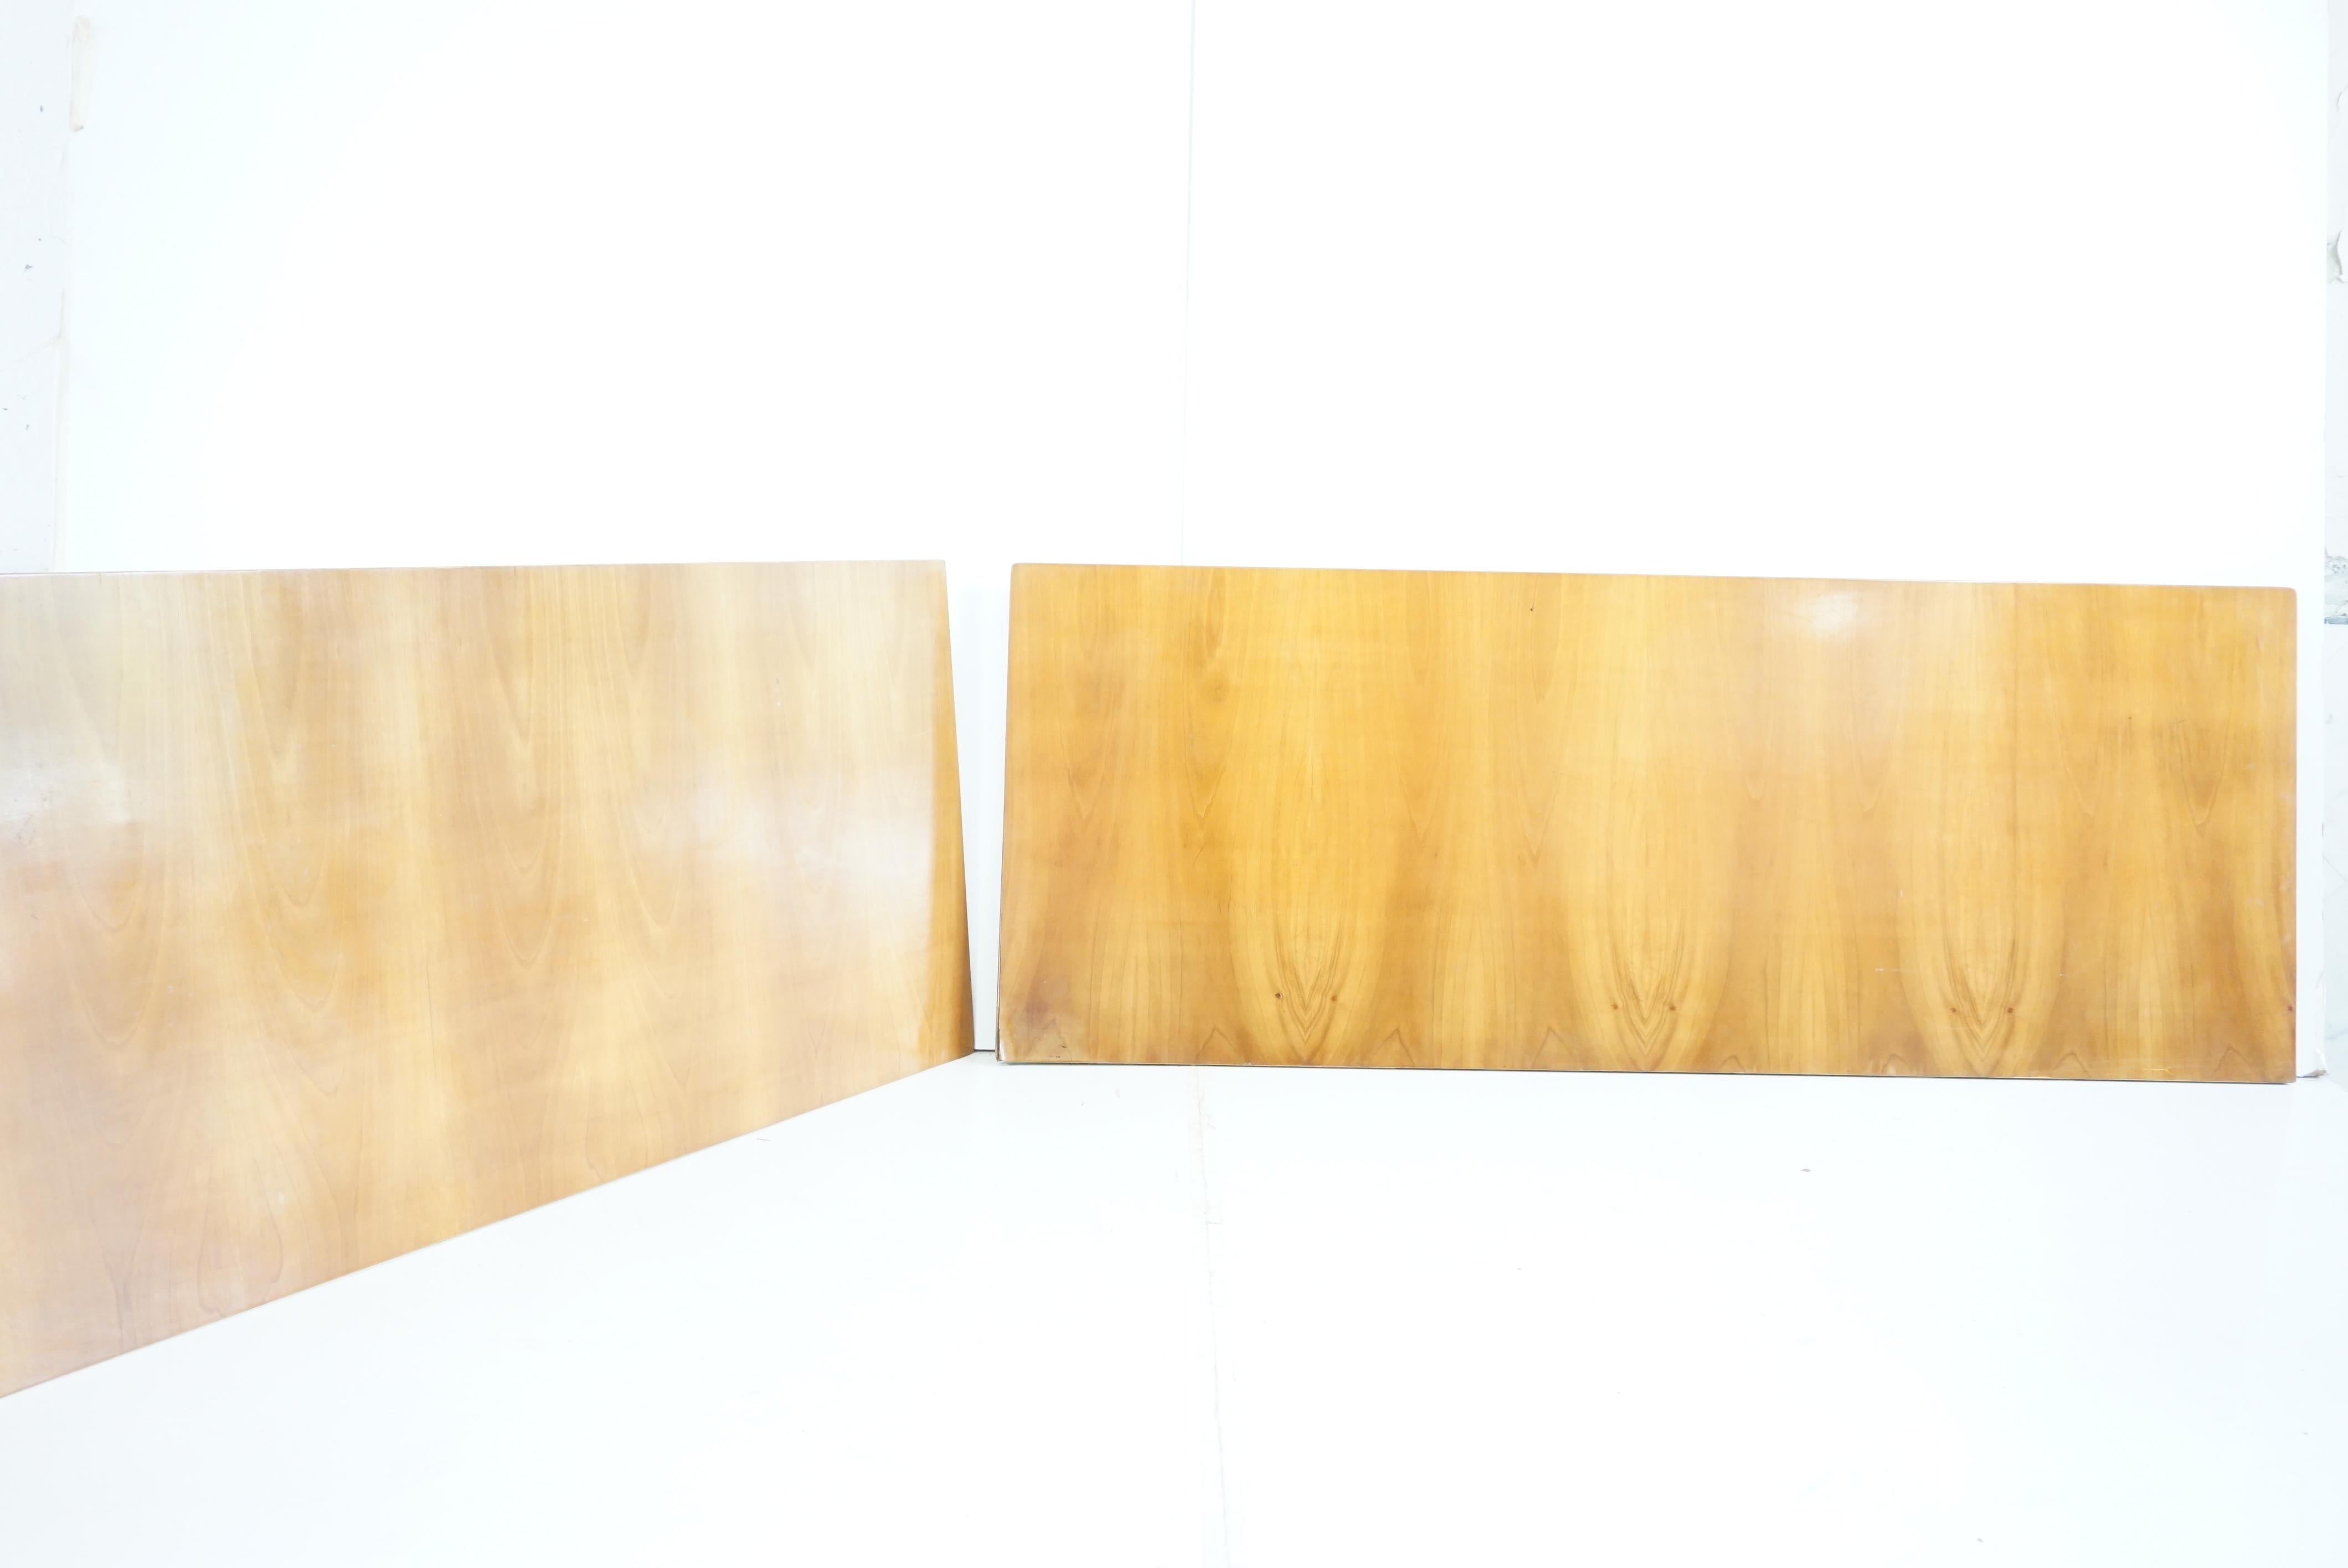 A pair of unique Gio Ponti wood panels from the furniture of the Hotel Royal in Naples, 1955.
Manufactured by Giordano Chiesa by Dassi.
elm wood 
thick edge with owl's beak
these pieces come from the original furnishings of the single rooms of the